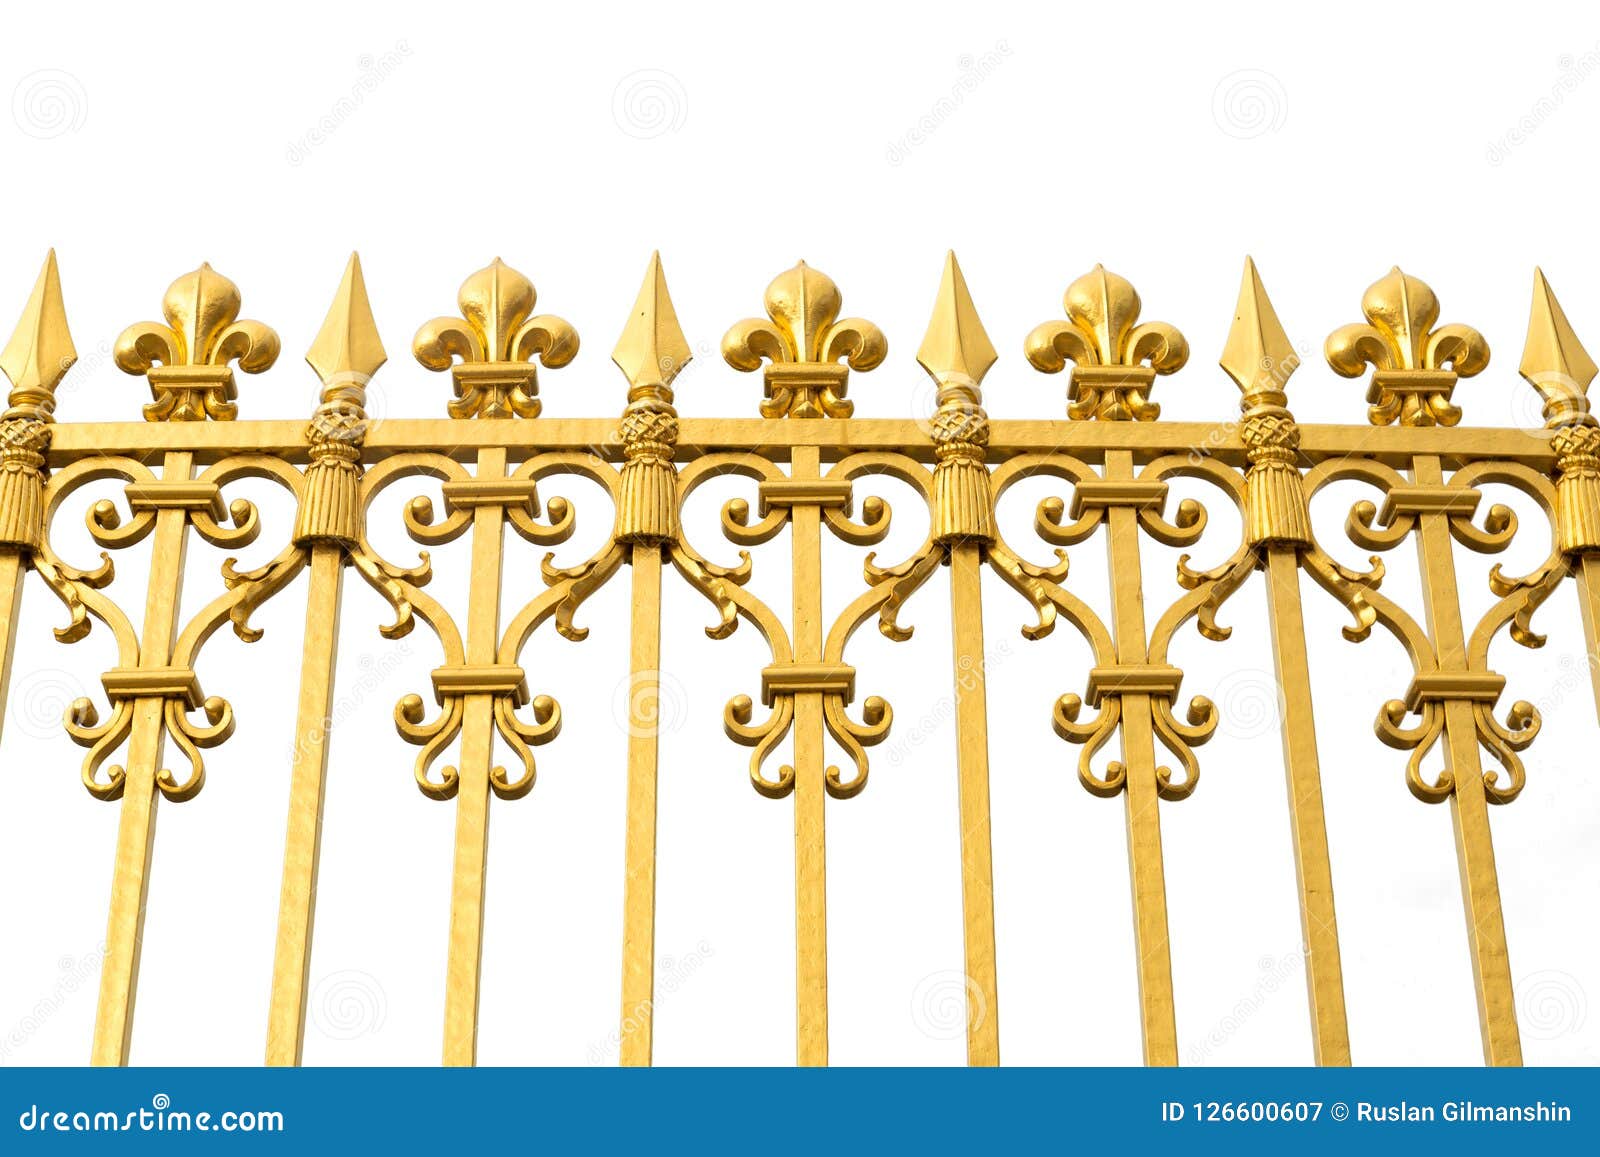 Isolated Golden Gates To Versailles Castle. France Stock Image - Image ...